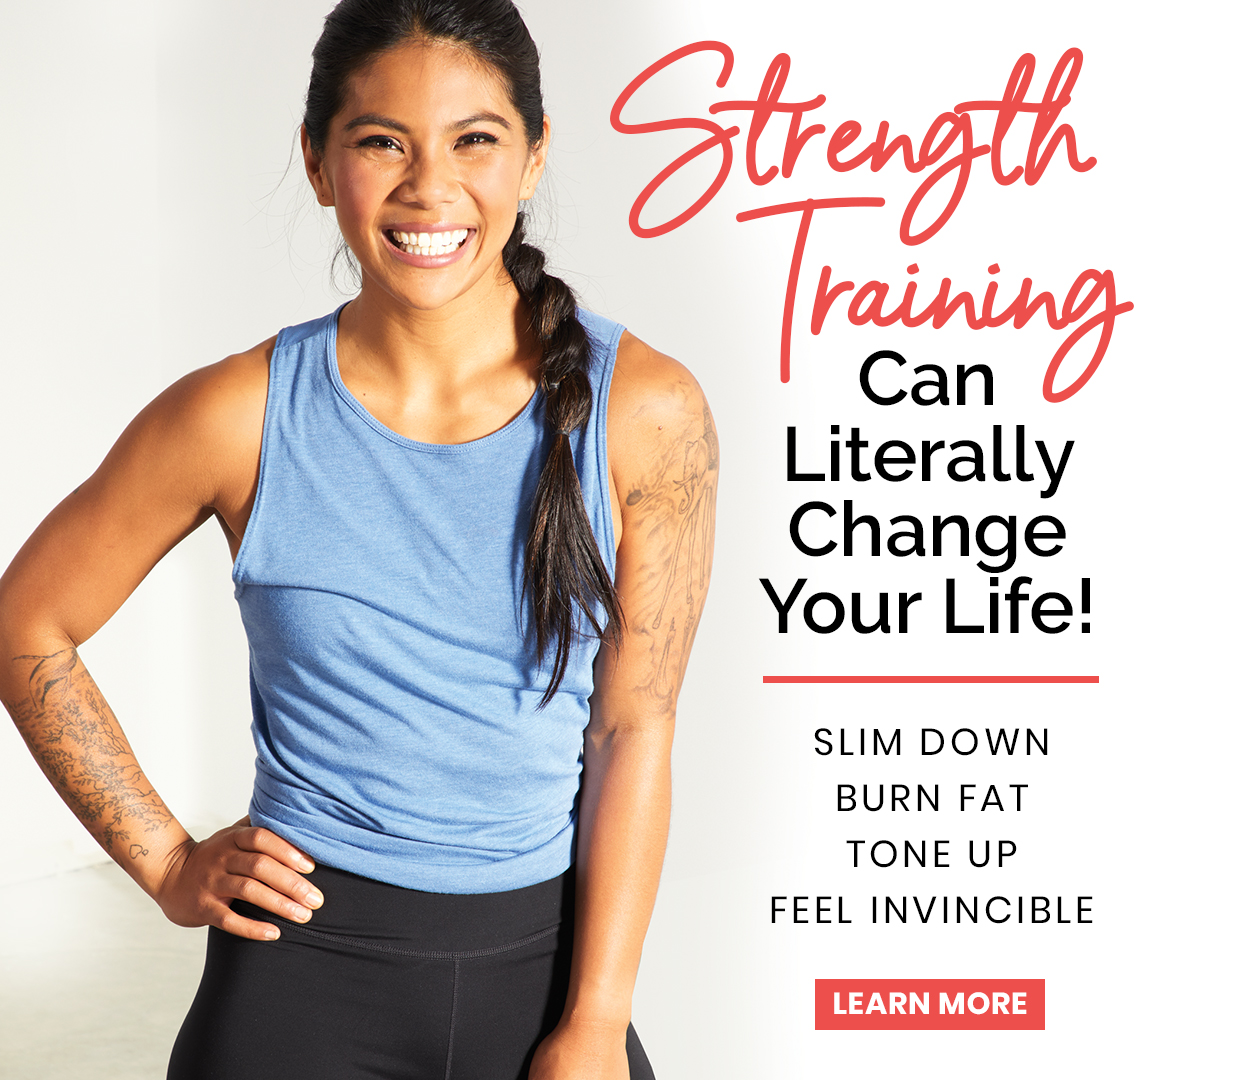 Try the work out that will help revive your metabolism, enhance muscle mass, boost energy levels, and tone your entire body.